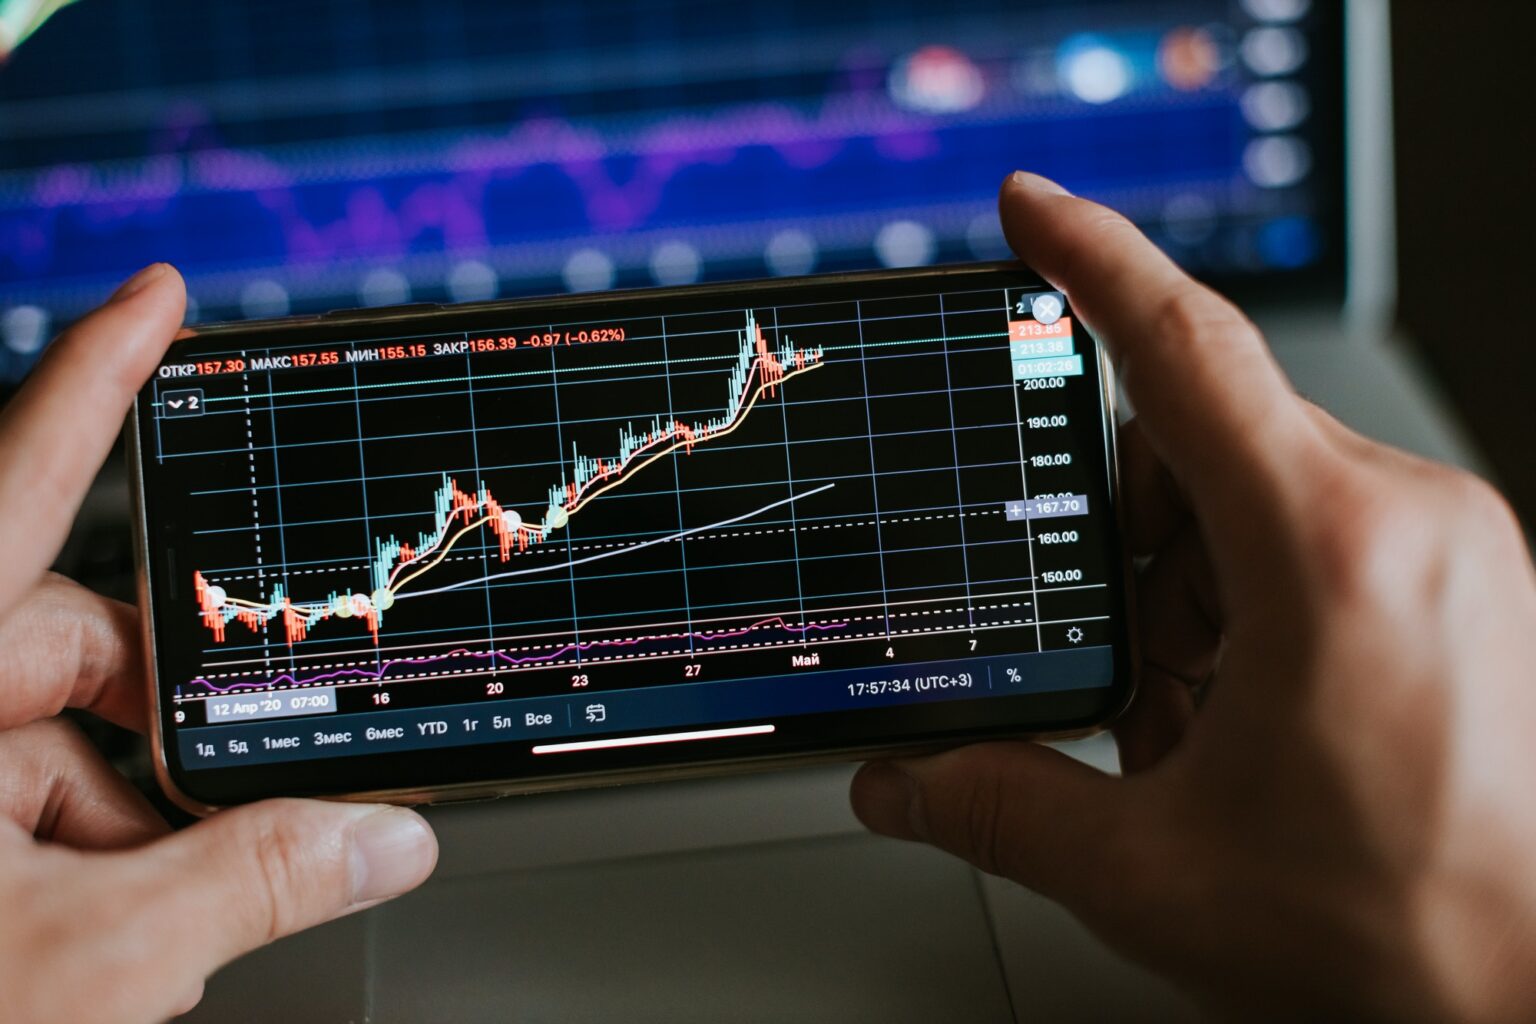 trader analyzing stock trading graph phone app